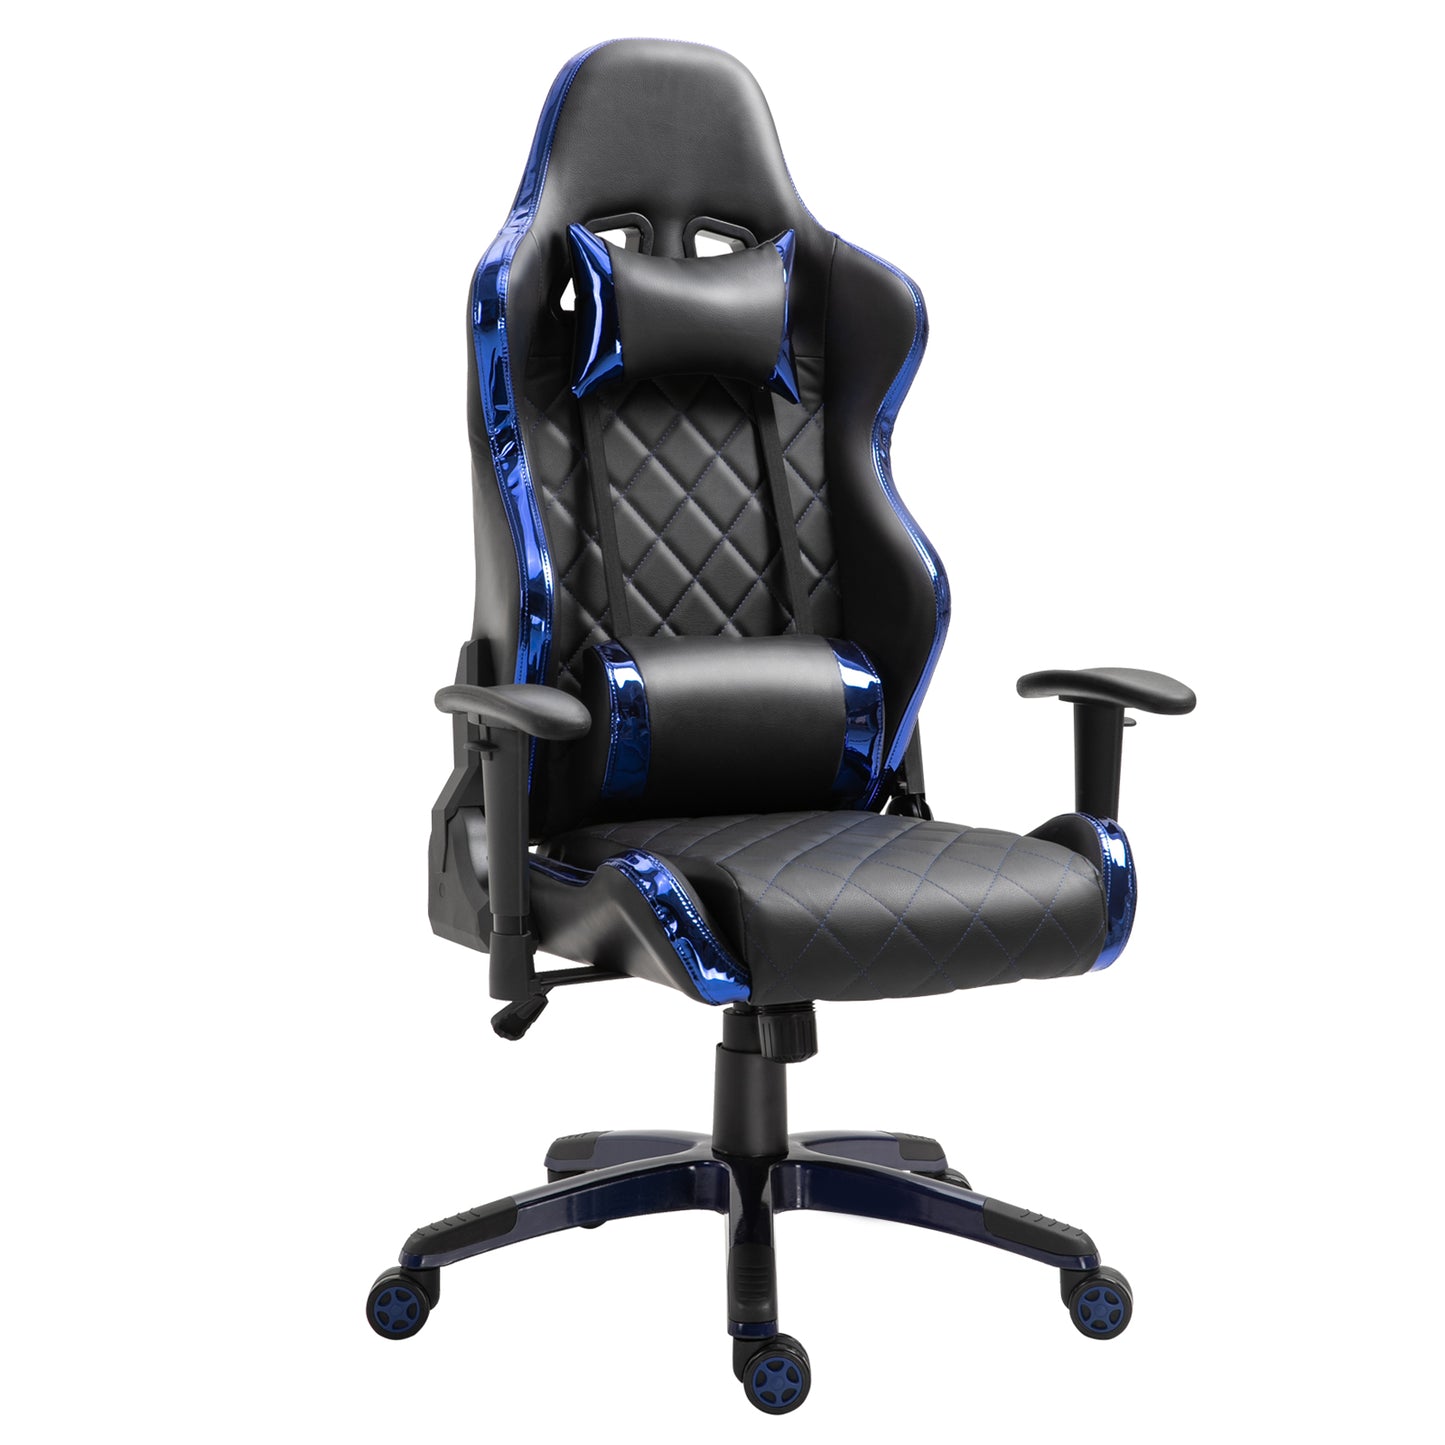 Vinsetto Holographic Stripe Gaming Chair Ergonomic PU Leather High Back 360° Swivel w/ 5 Wheels 2 Pillows Back Support Racing Reclining Black and Blue